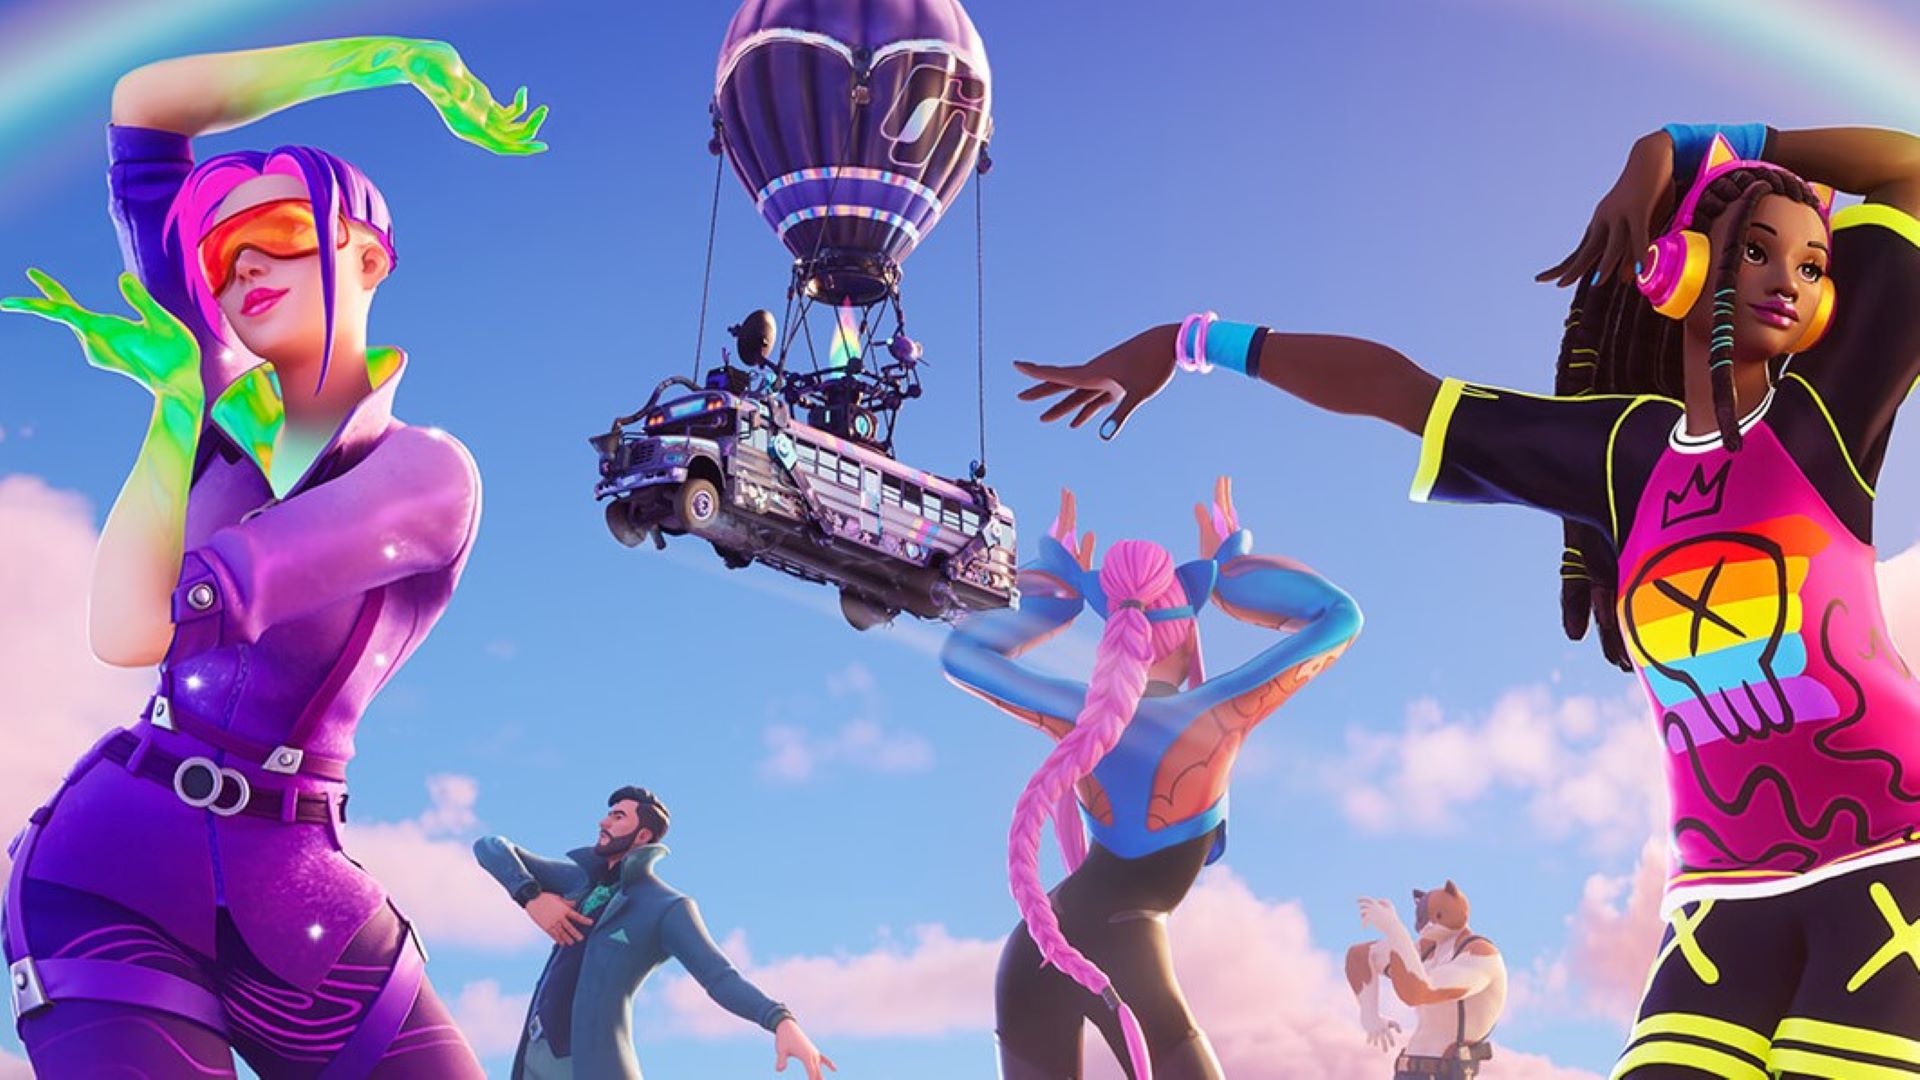 Fortnite's fifth birthday celebrations are coming